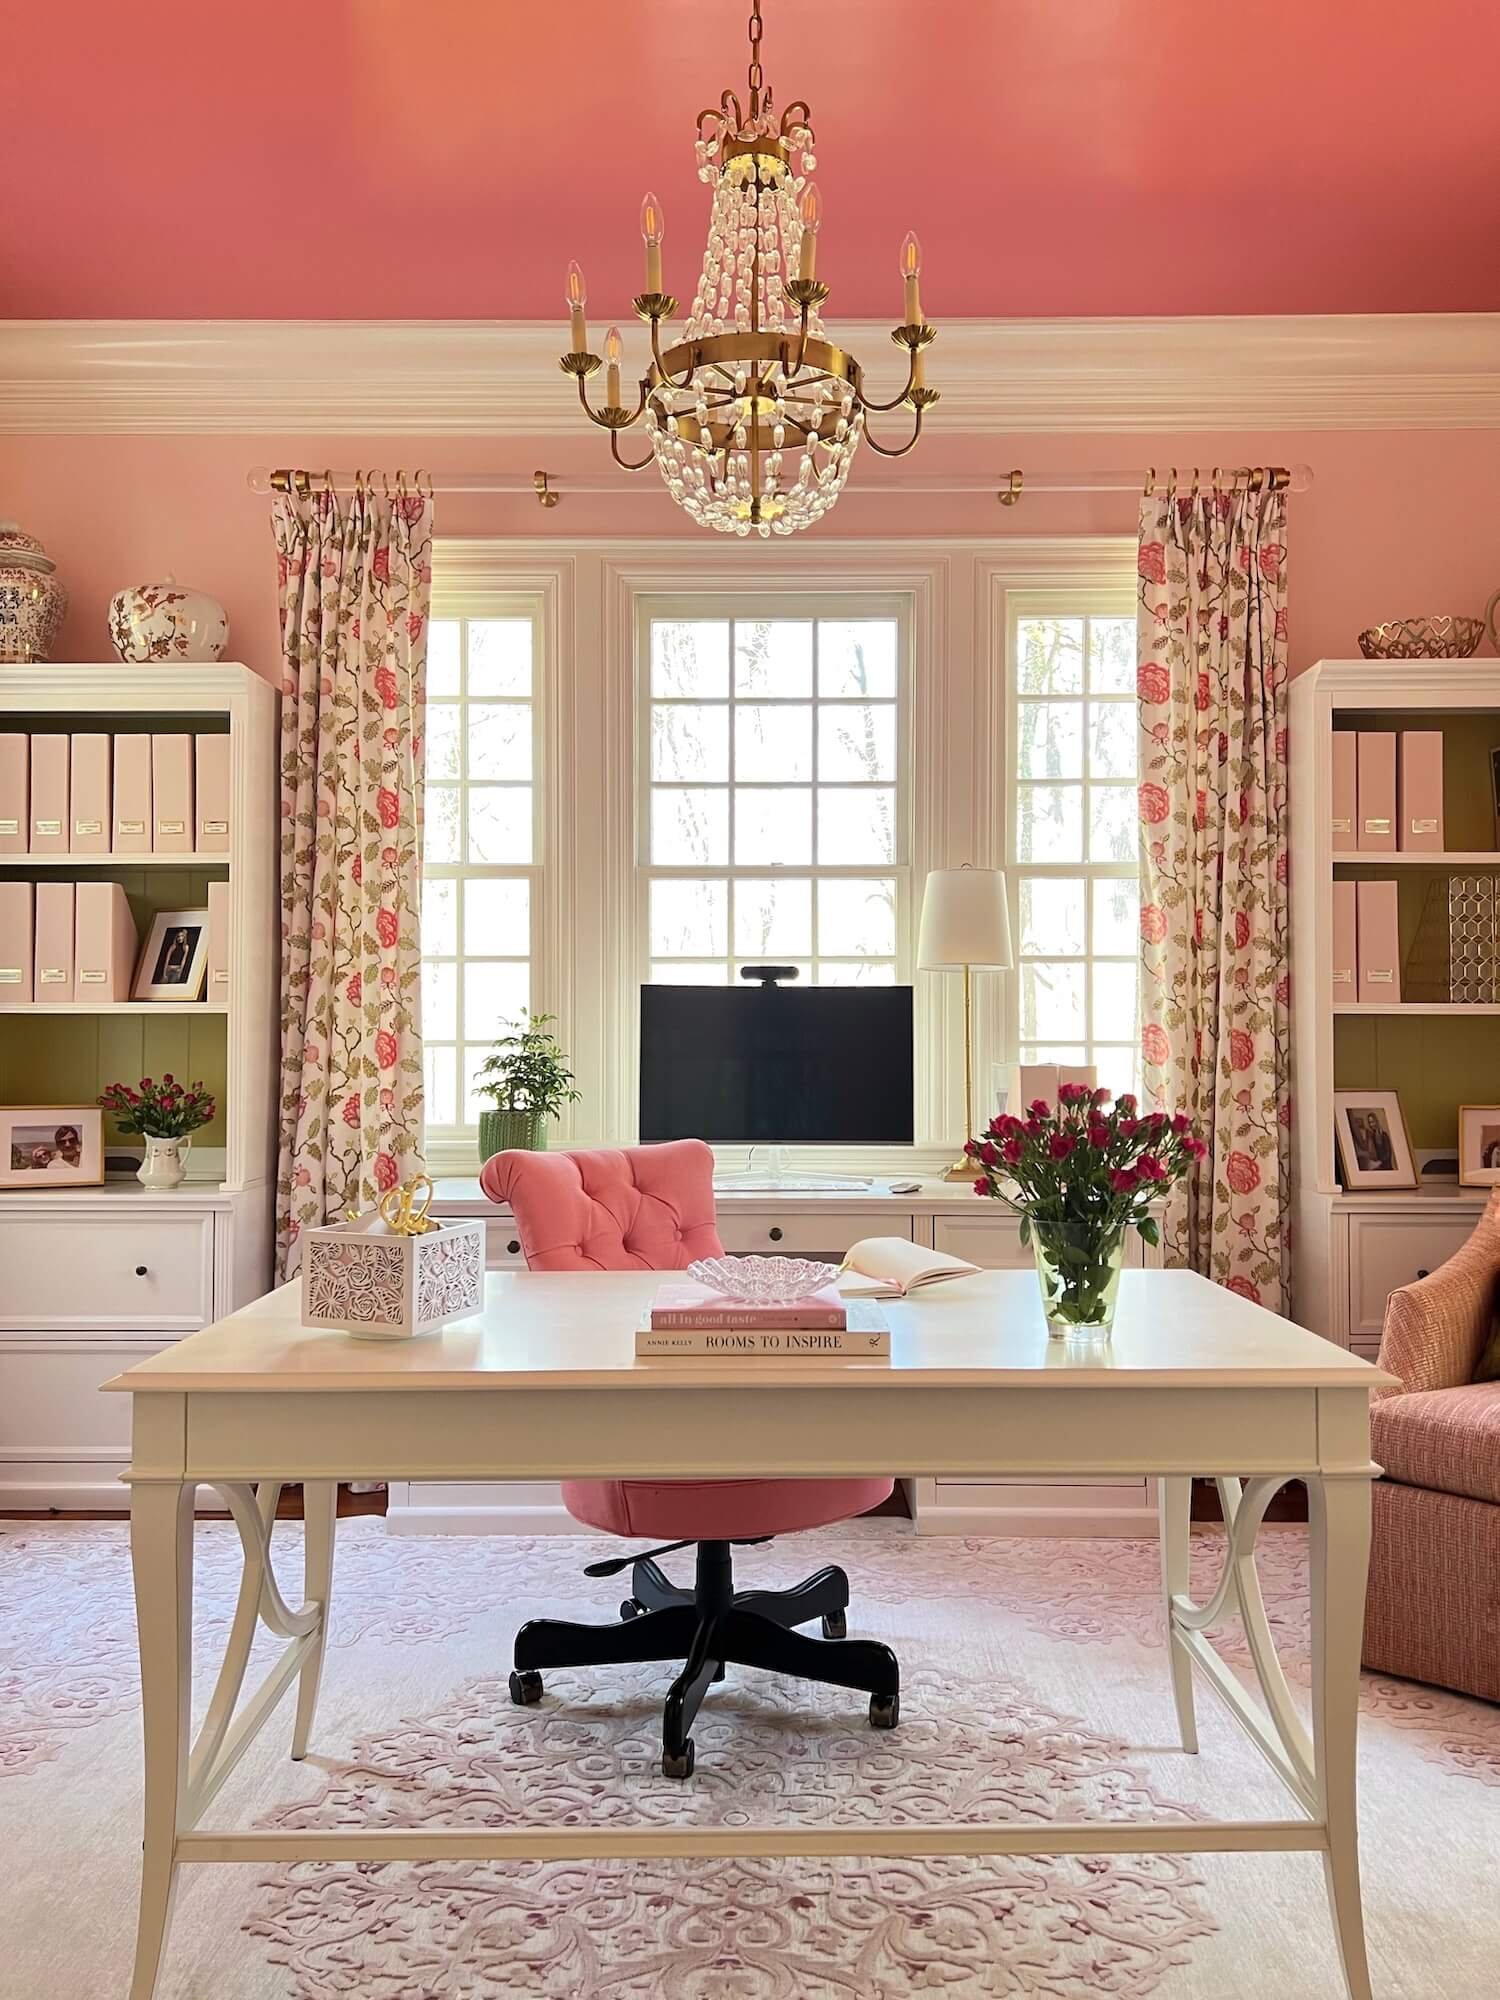 JRL Interiors — A chic and elegant pink home office